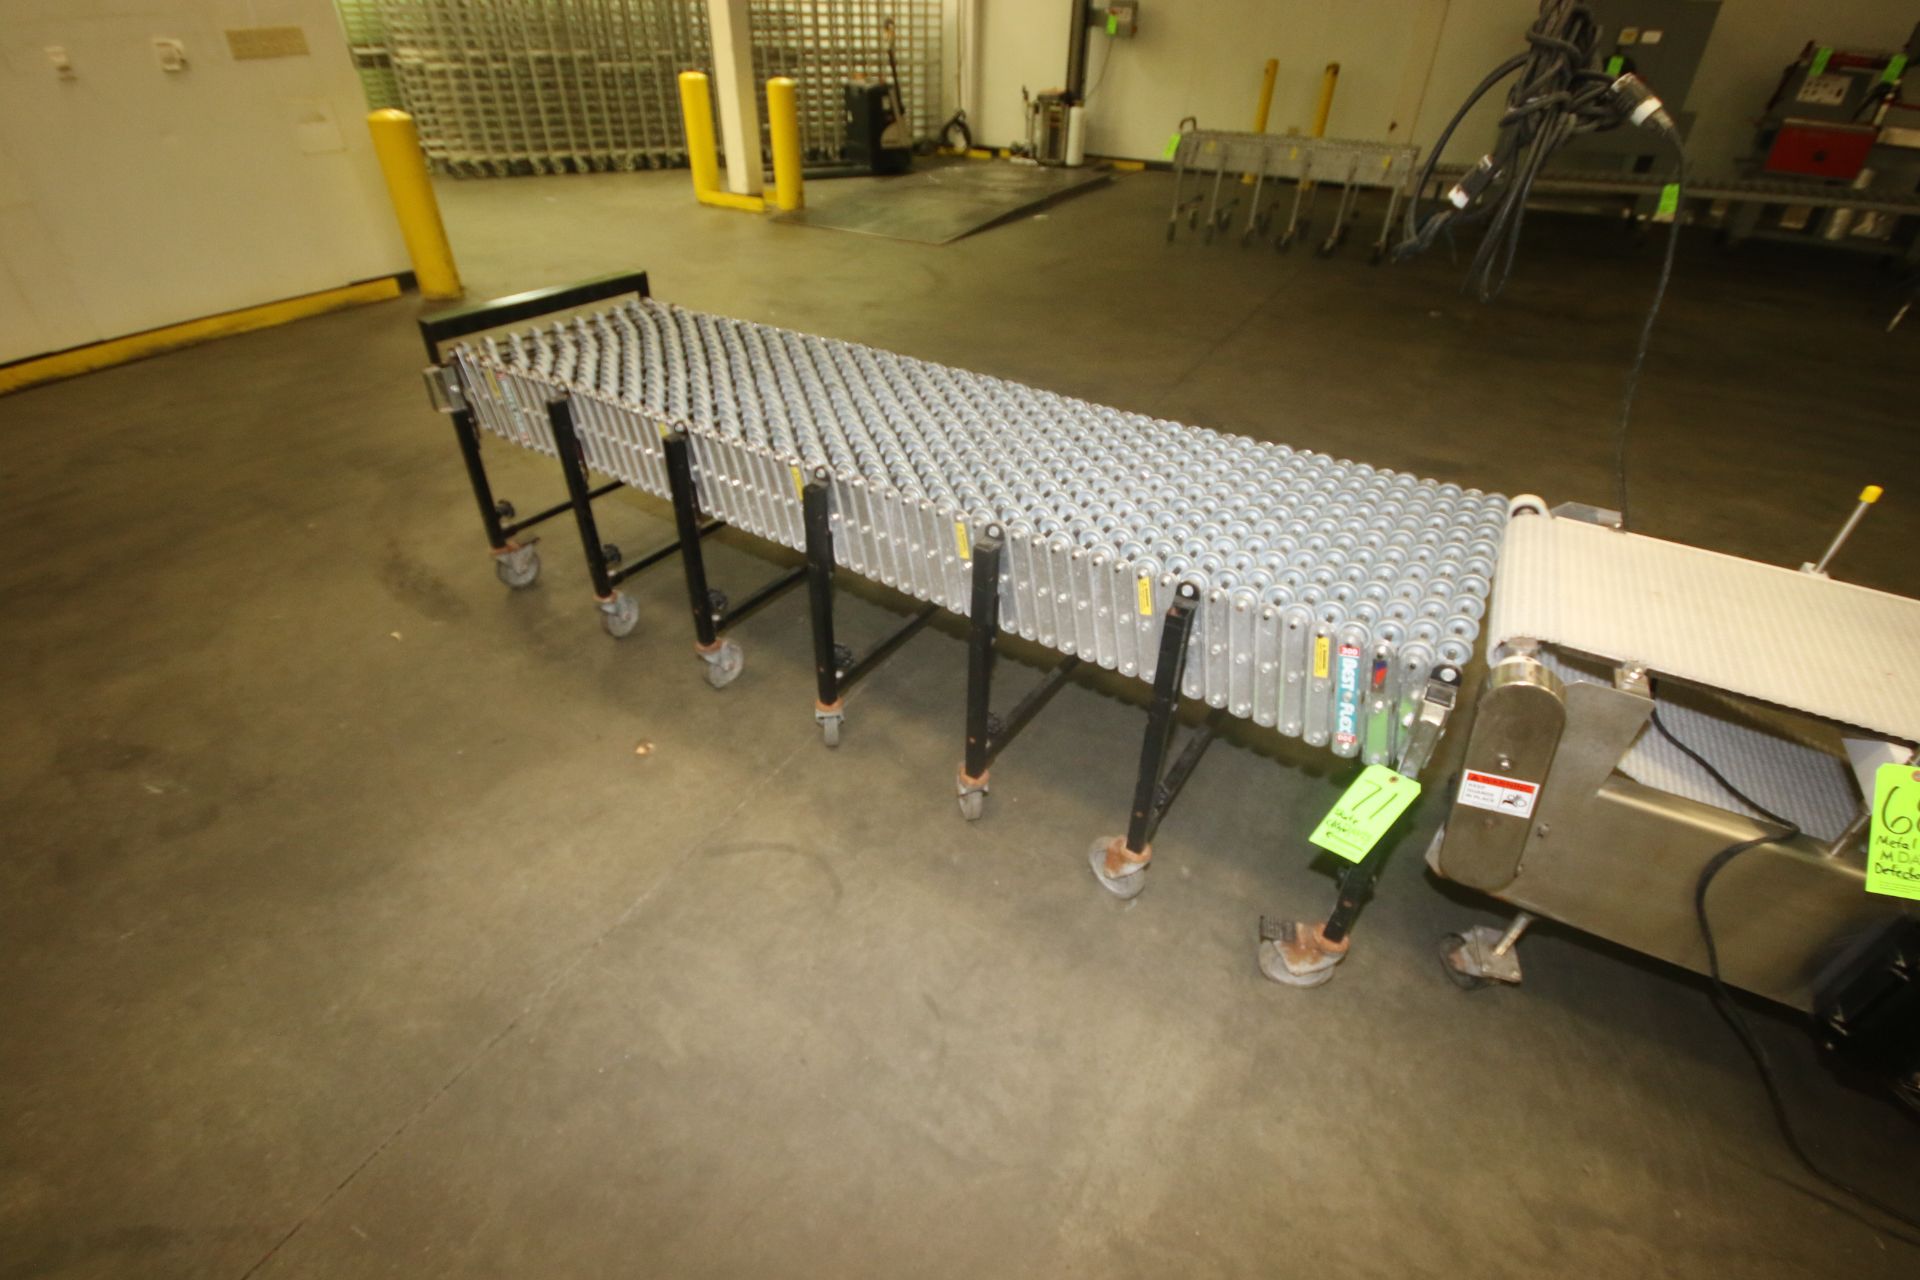 Best Flex Skate Conveyor, Aprox. 24" W, with Adjustable Frame, Mounted on Casters (LOCATED AT BAKE